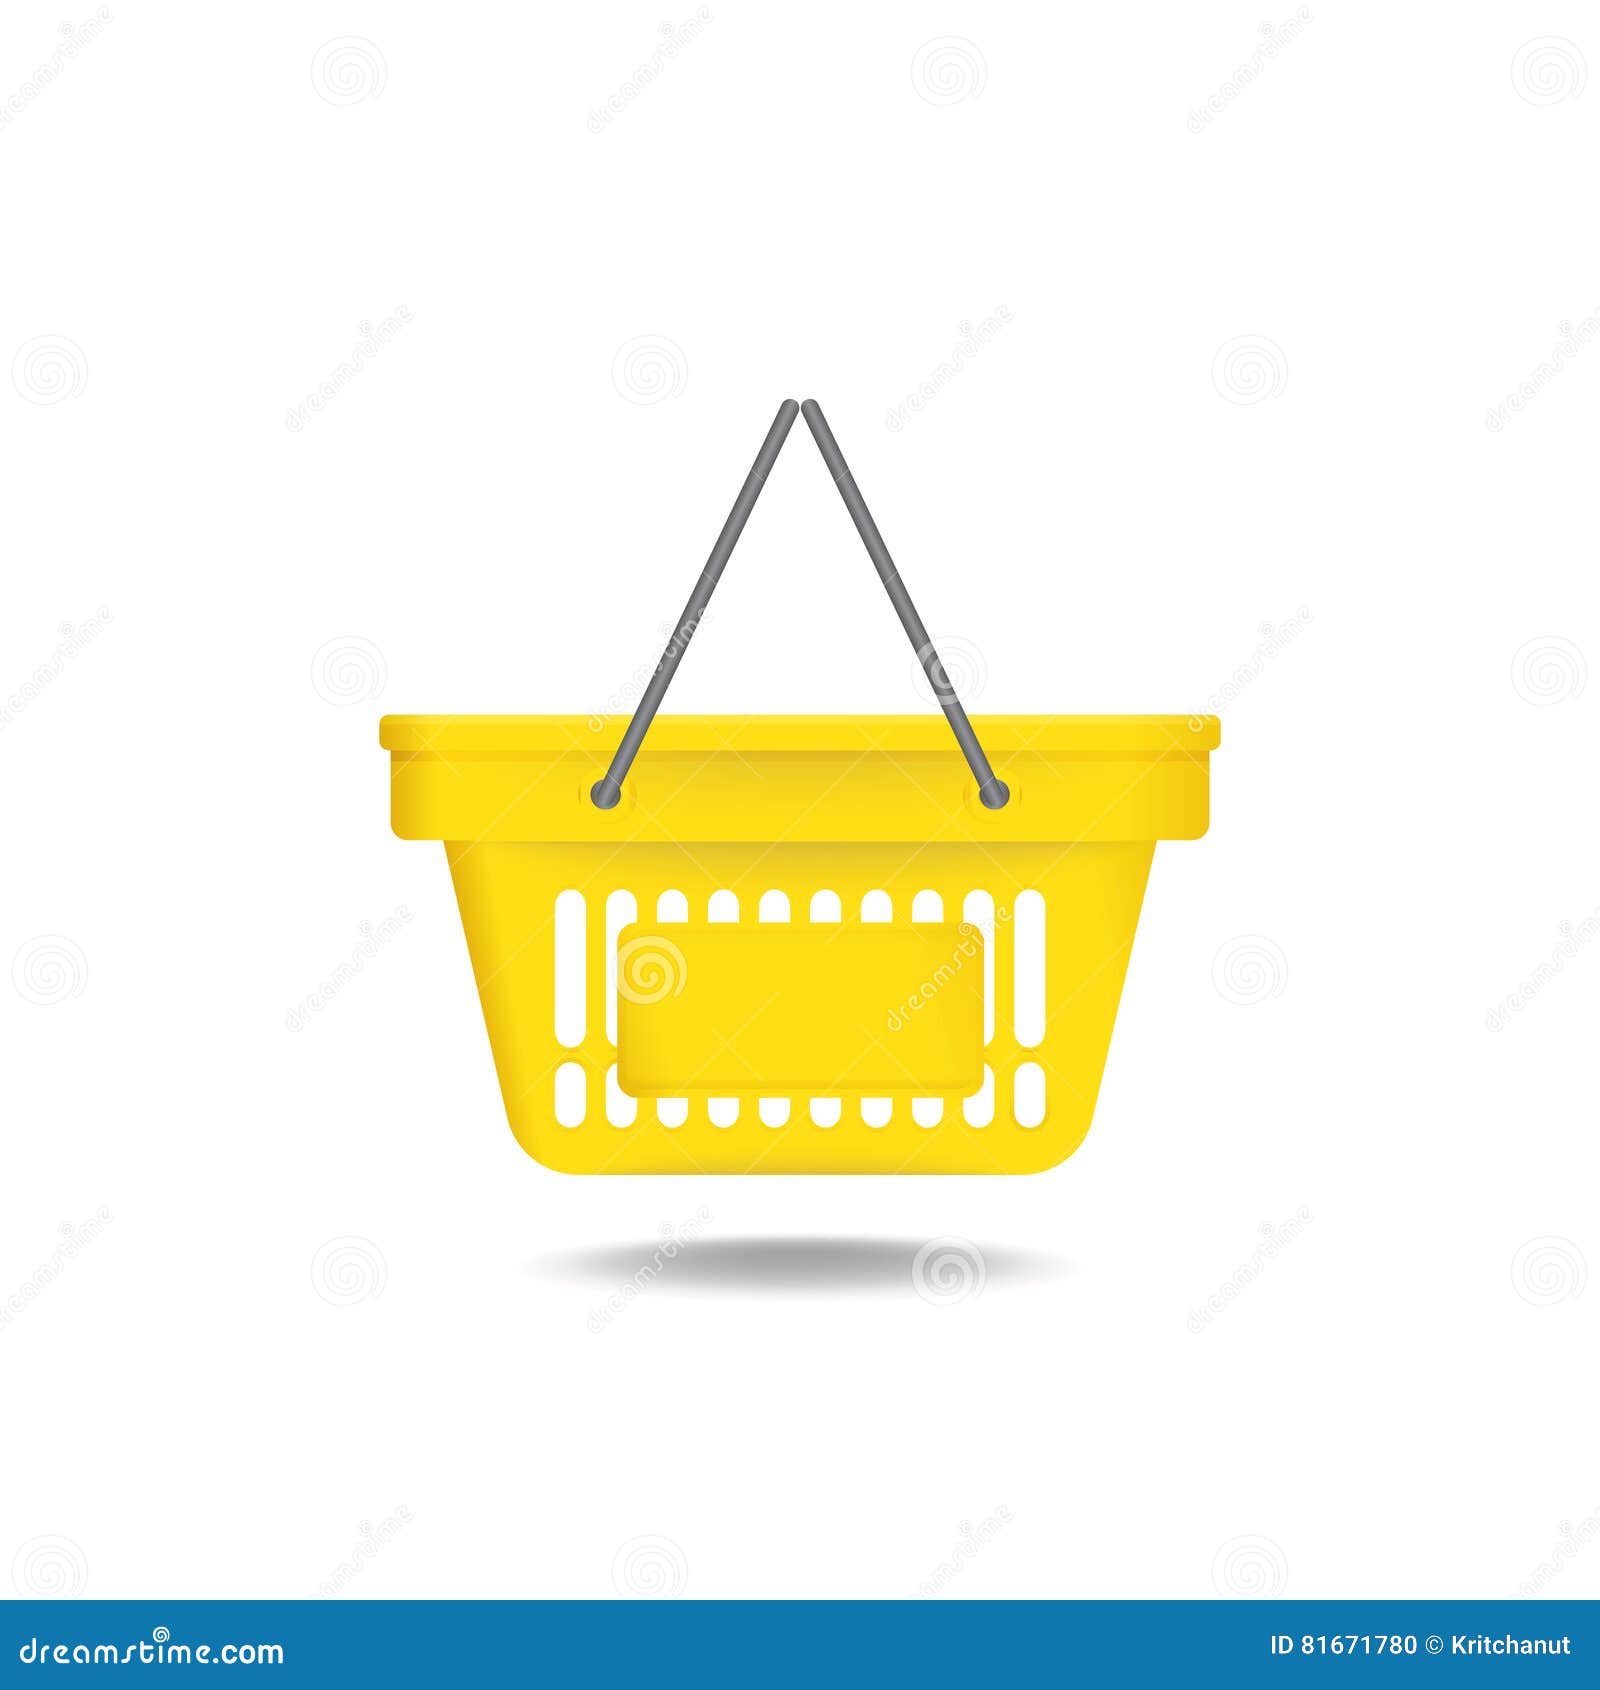 67 Off. 3D Yellow Shopping Bag Concept In White Background.67 Percent ...